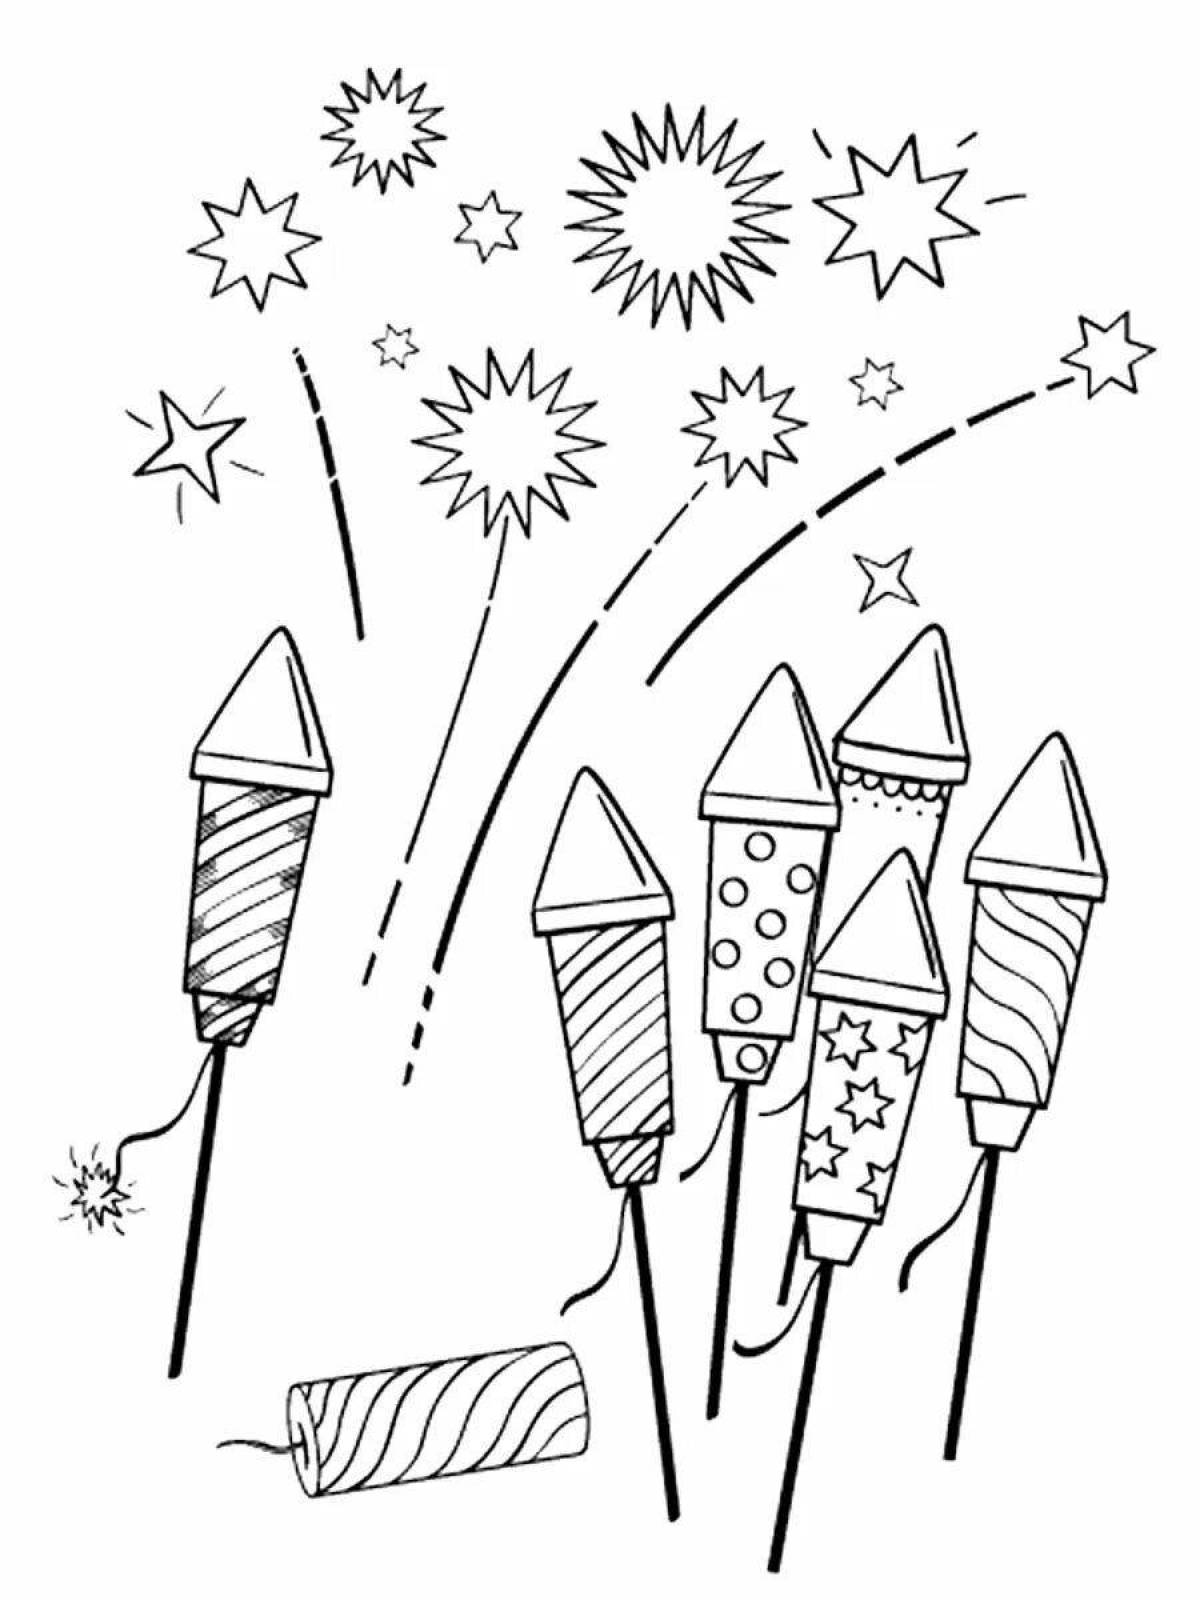 Sparklers inviting coloring page